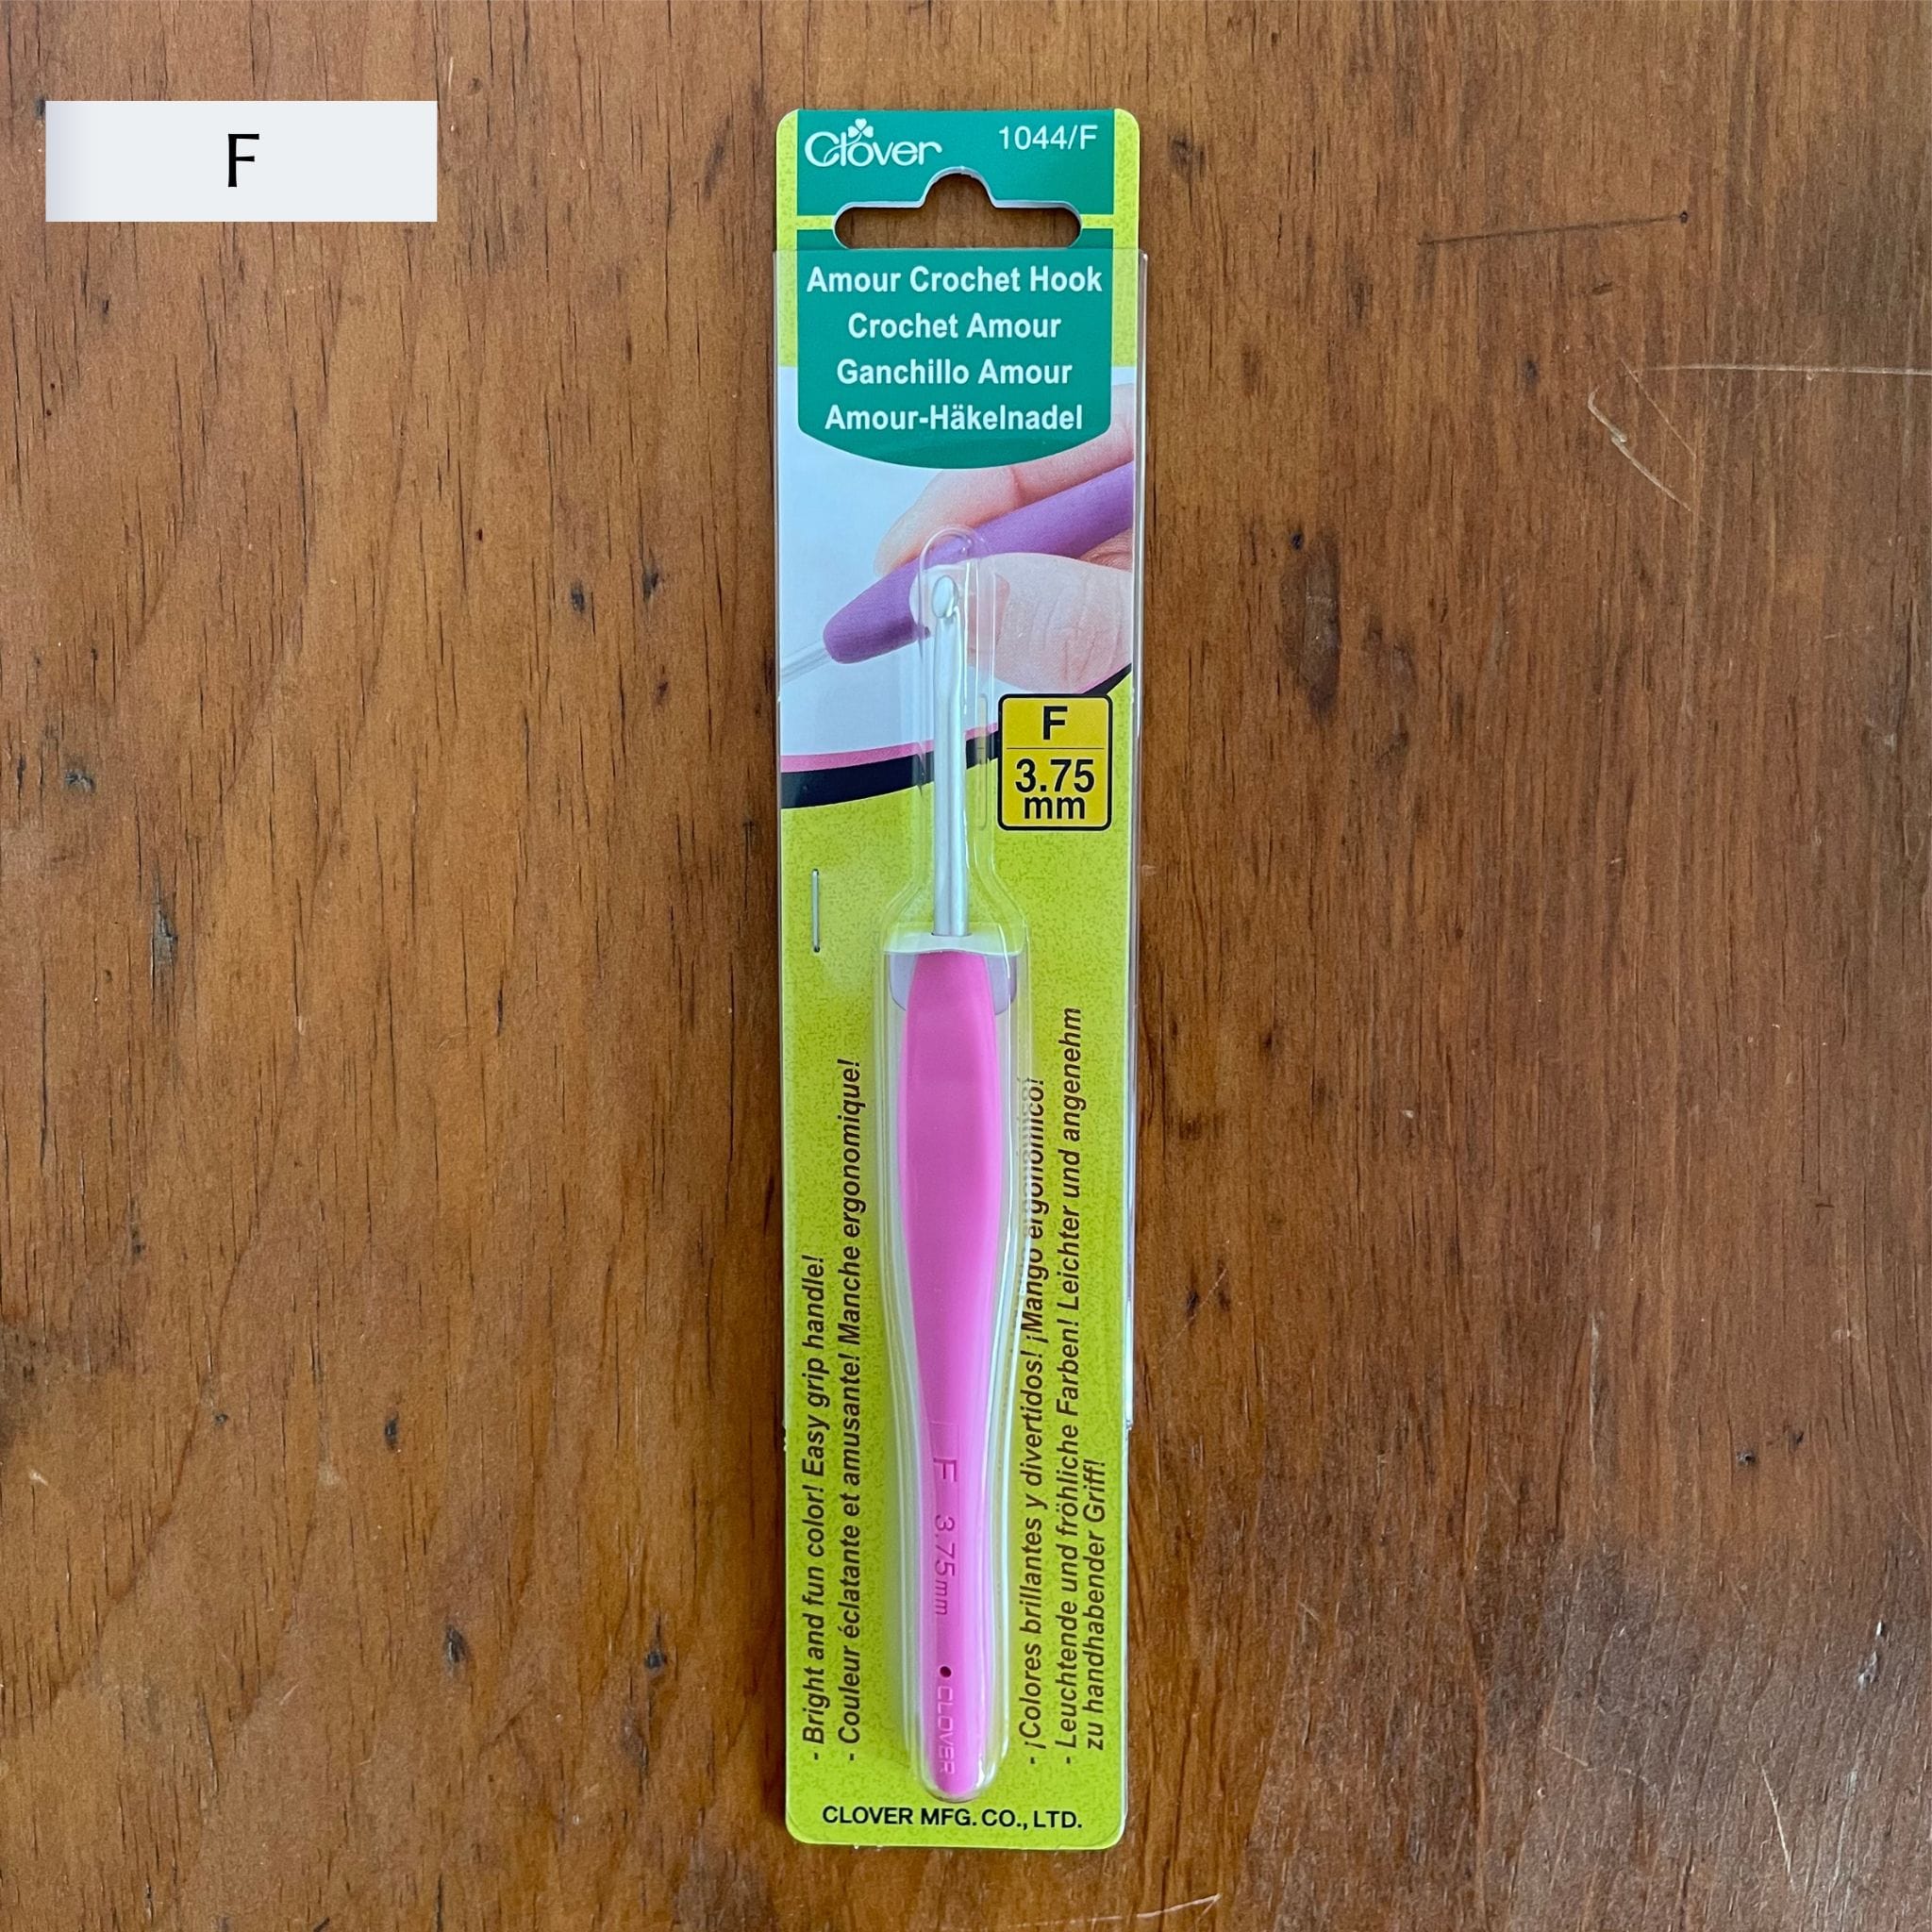 Amour Crochet Hooks – The Woolly Thistle